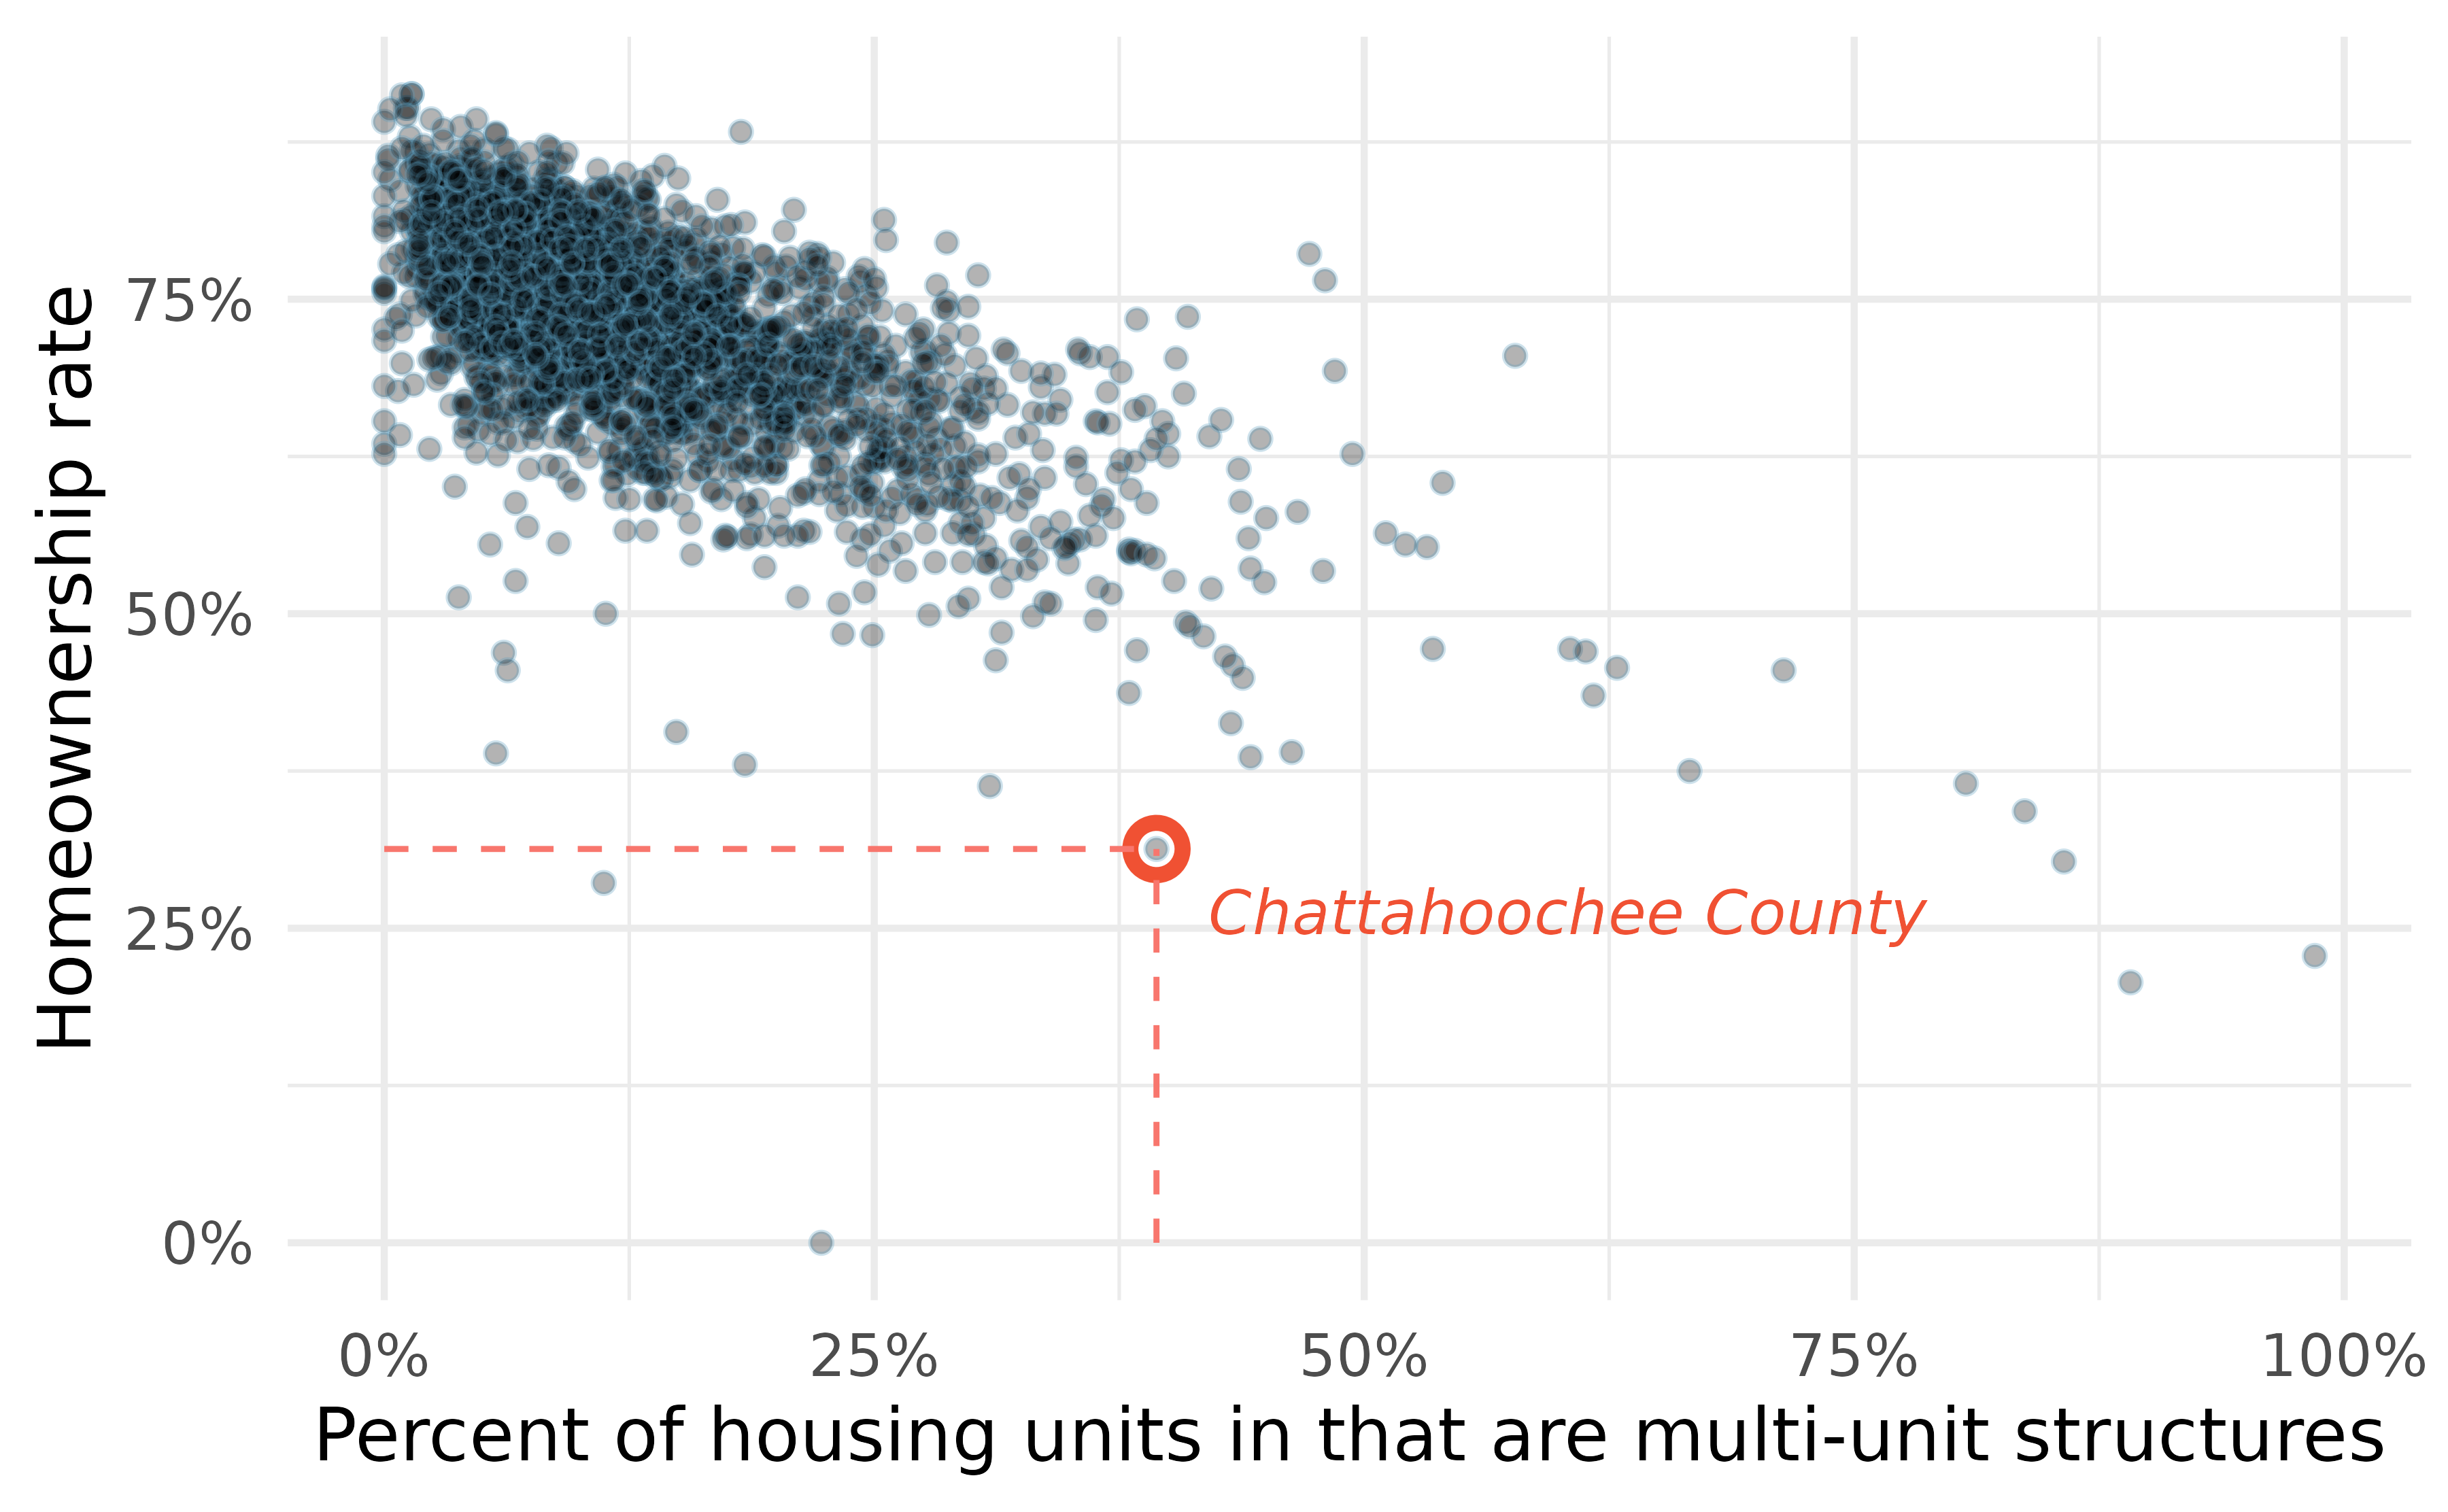 A scatterplot of homeownership (on the y-axis) versus the percent of housing units that are in multi-unit structures (on the x-axis) for US counties. The observation from Chattahoochee County, Georgia is highlighted as having a multi-unit rate of 39.4% and a homeownership rate of 31.3%